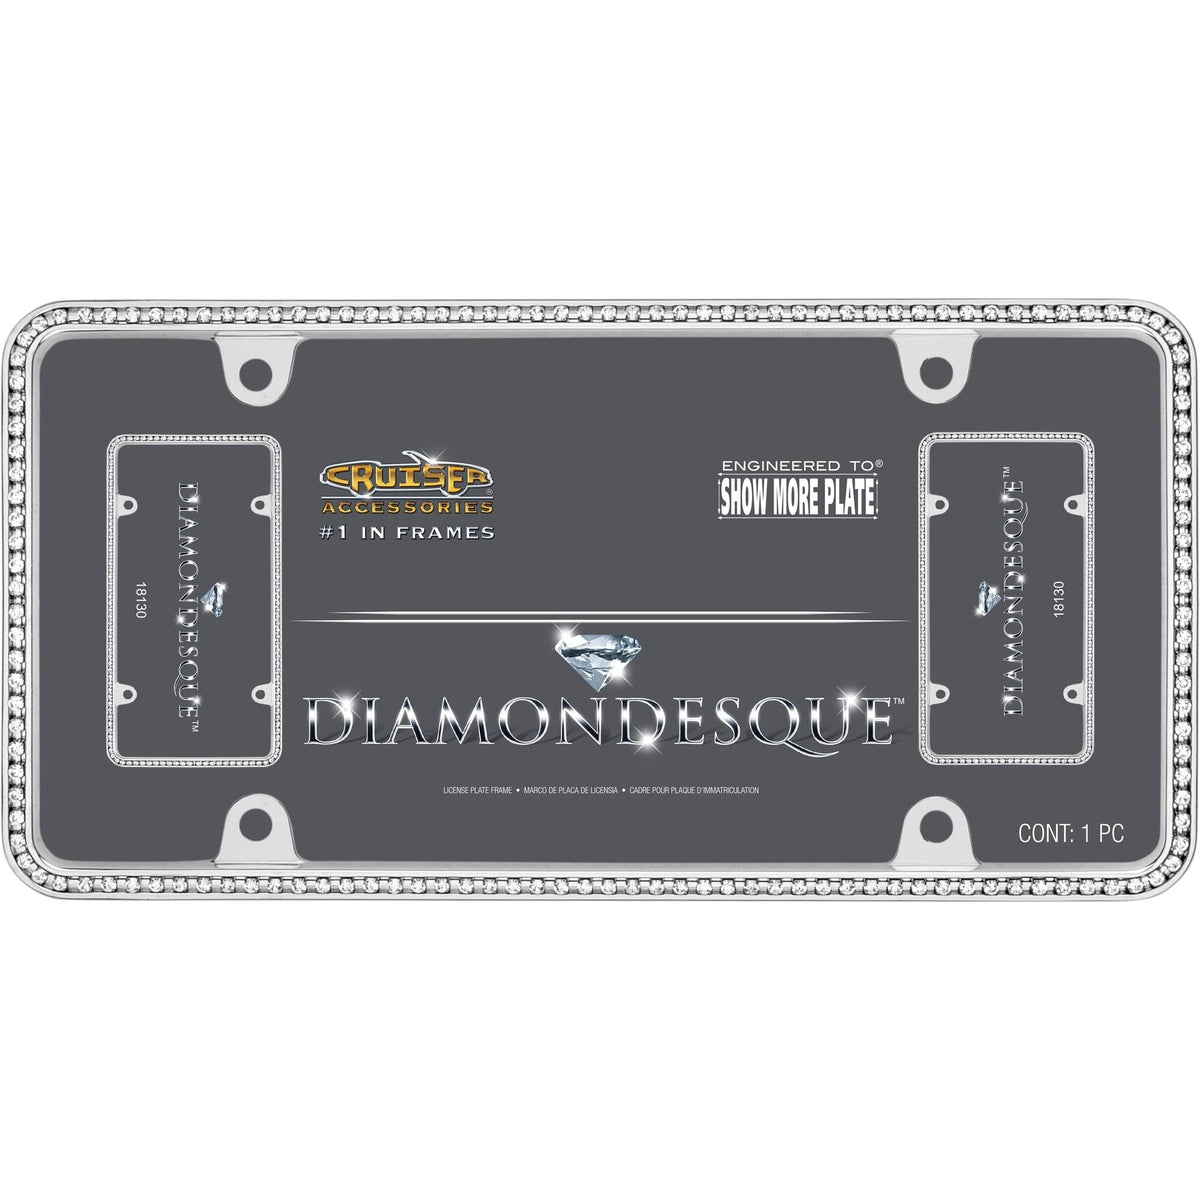 Cruiser Accessories Qualifies for Free Shipping Cruiser License Plate Frame Diamondesque Metal #18130